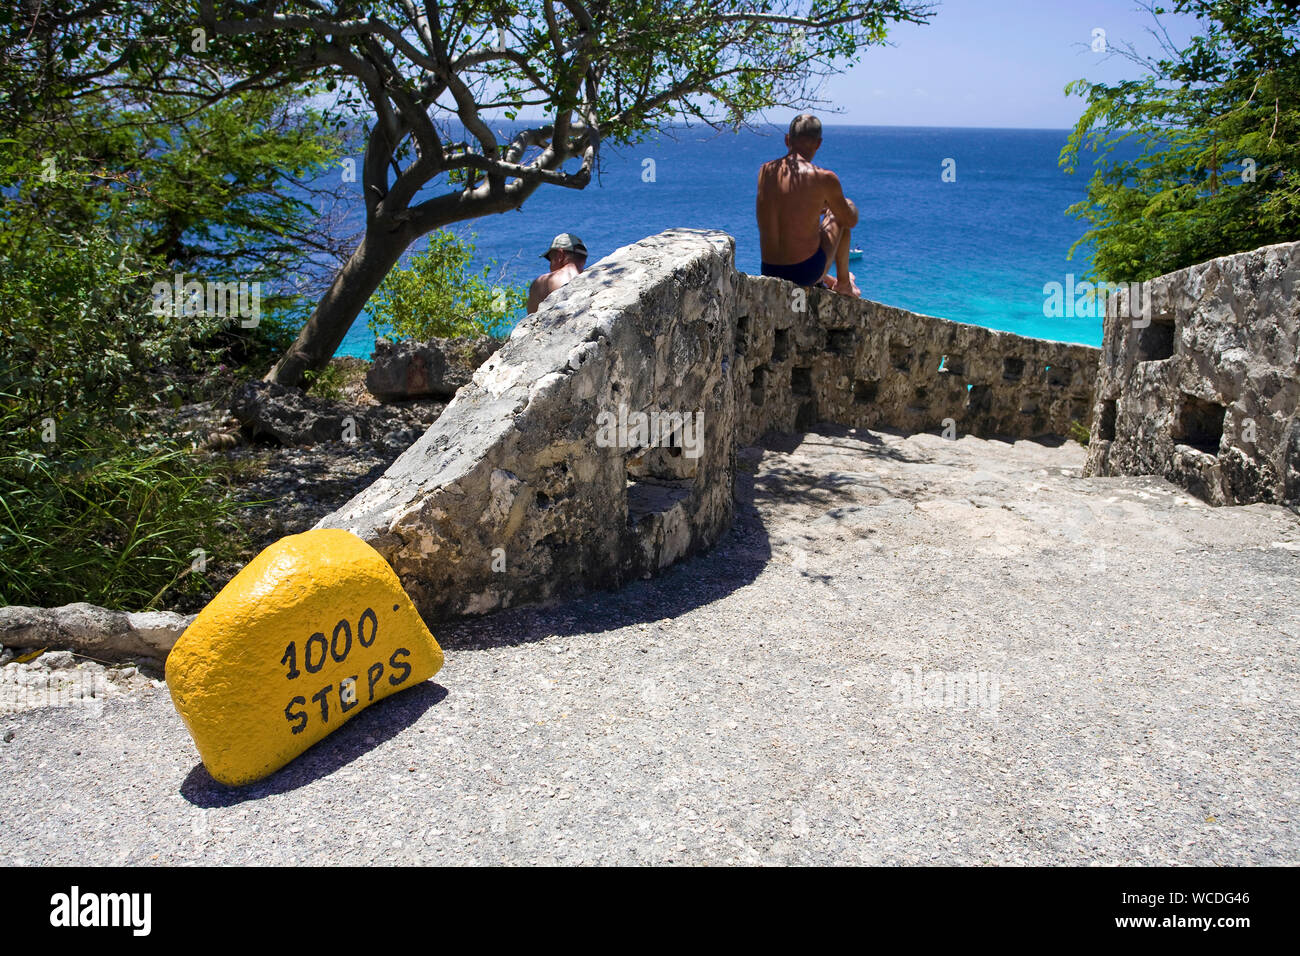 Stairway down to dive site '1000 steps', famous for snorkeling and scuba diving, Bonaire, Netherland Antilles Stock Photo